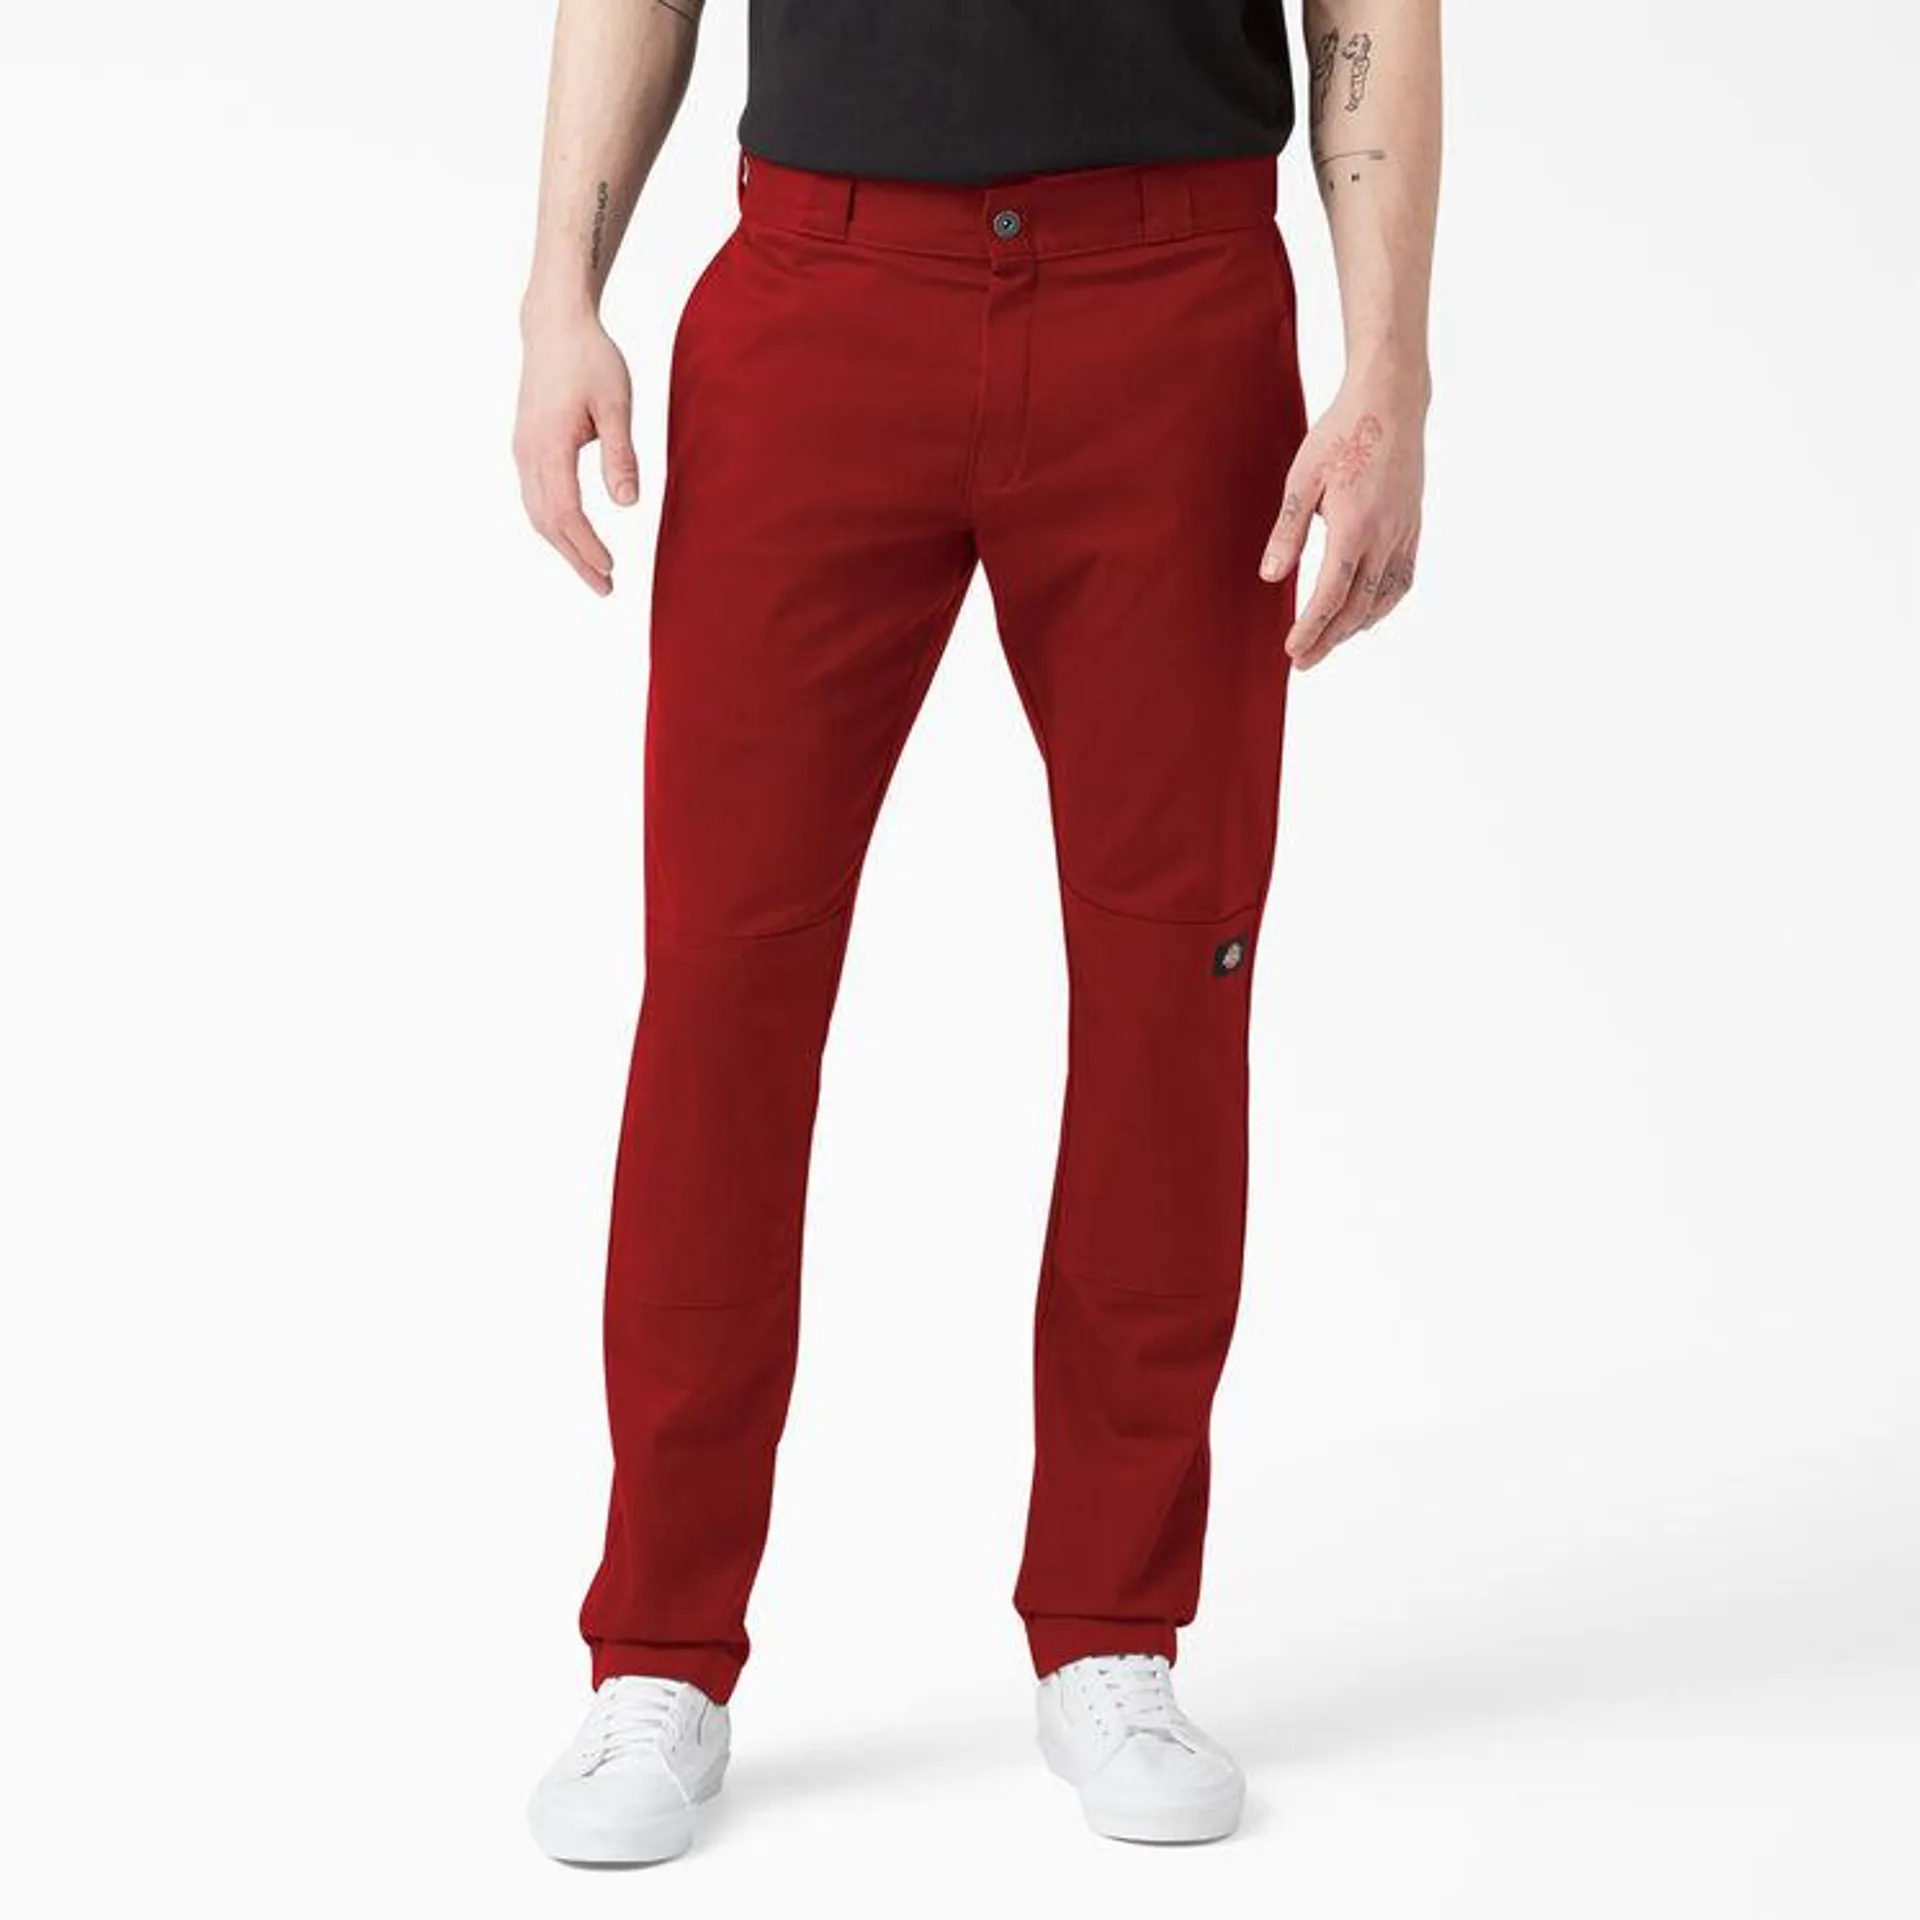 Skinny Fit Straight Leg Double Knee Work Pants, English Red